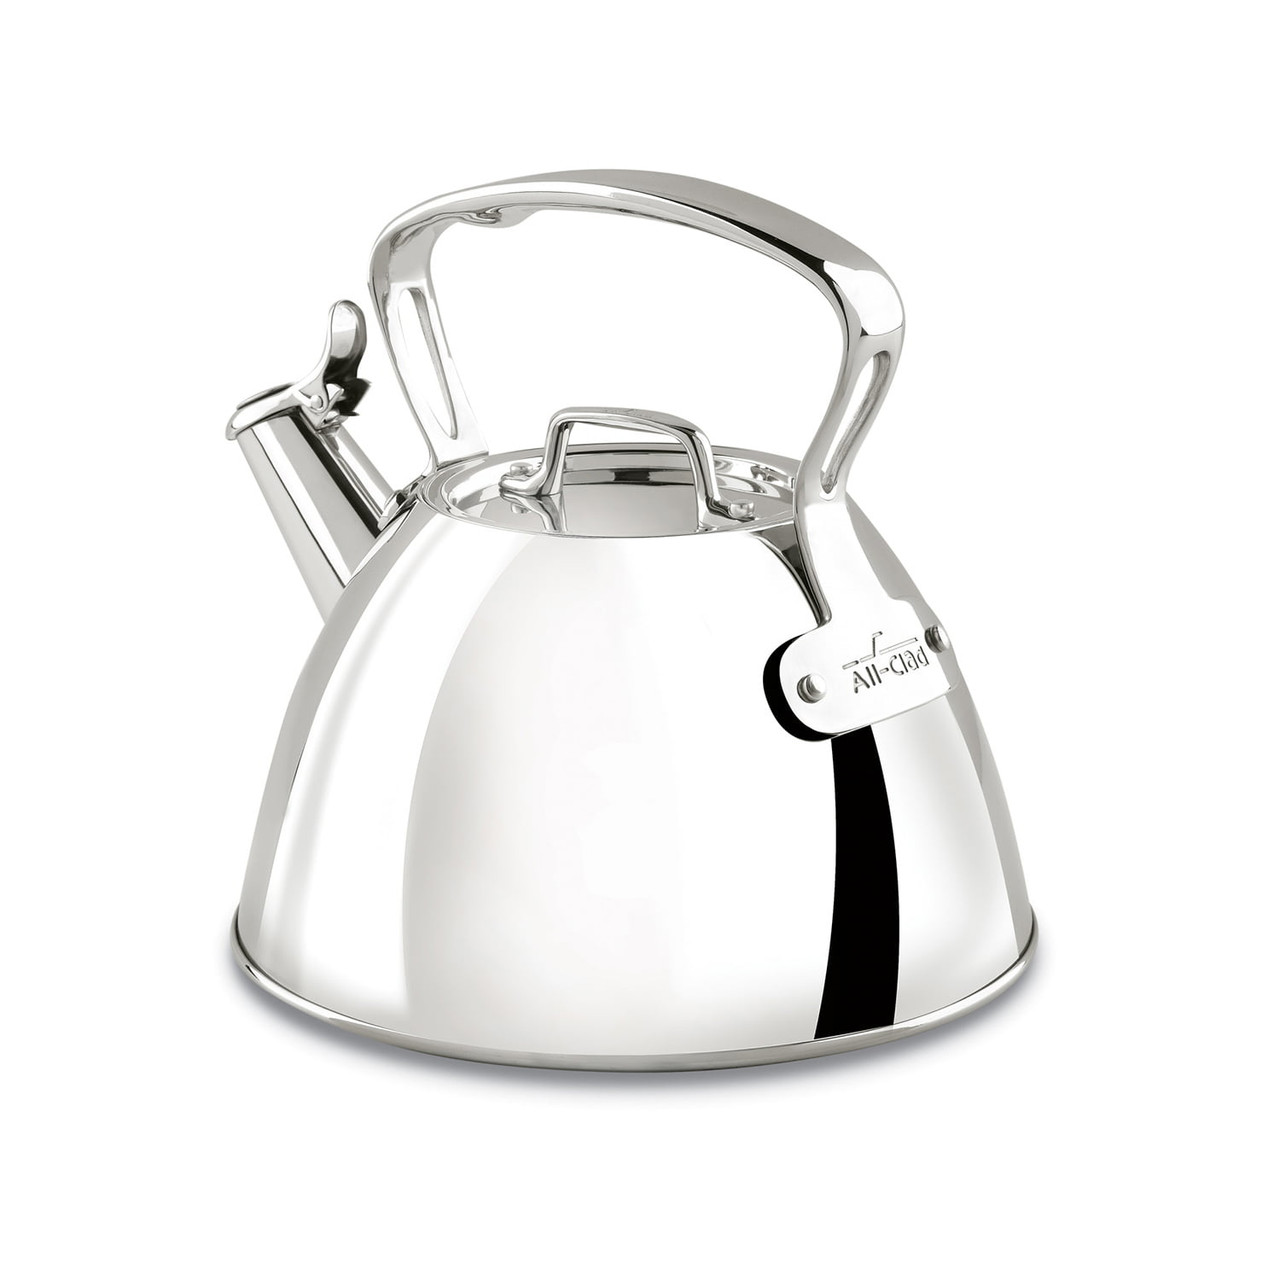 https://cdn11.bigcommerce.com/s-hccytny0od/images/stencil/1280x1280/products/4021/14804/all-clad-stainless-steel-tea-kettle__68111.1620122796.jpg?c=2?imbypass=on